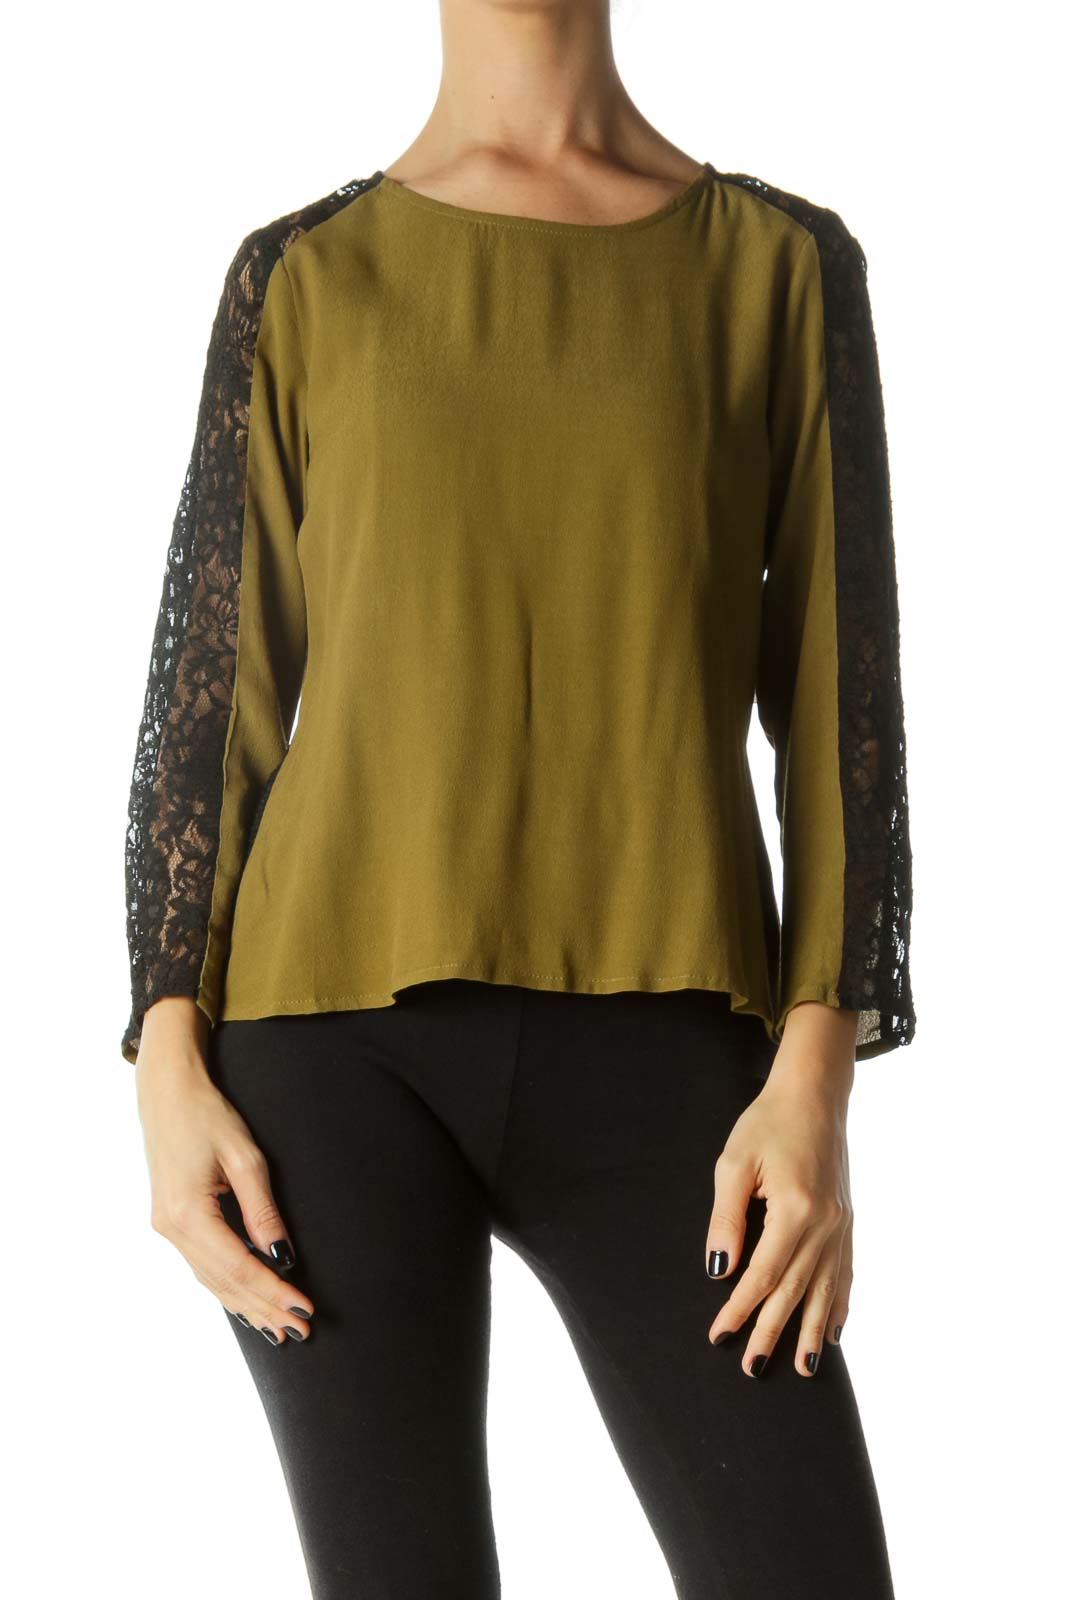 Black & Green Lace See-Through Blouse Front